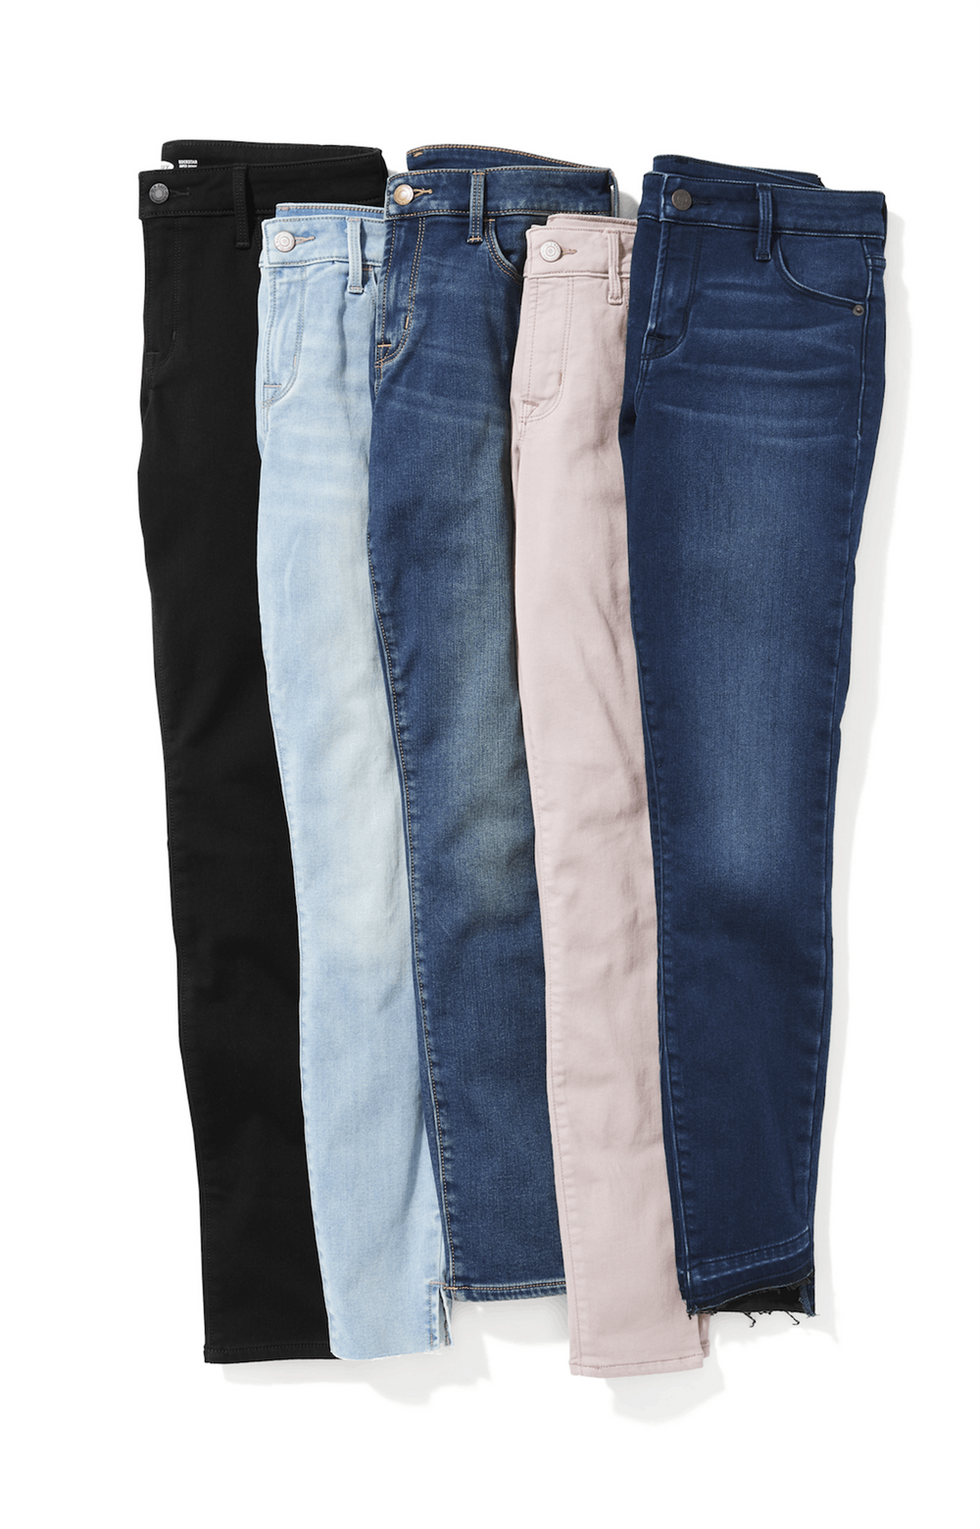 Old Navy’s New Warm Jeans Keep You Toasty Without the Bulk - Brit + Co